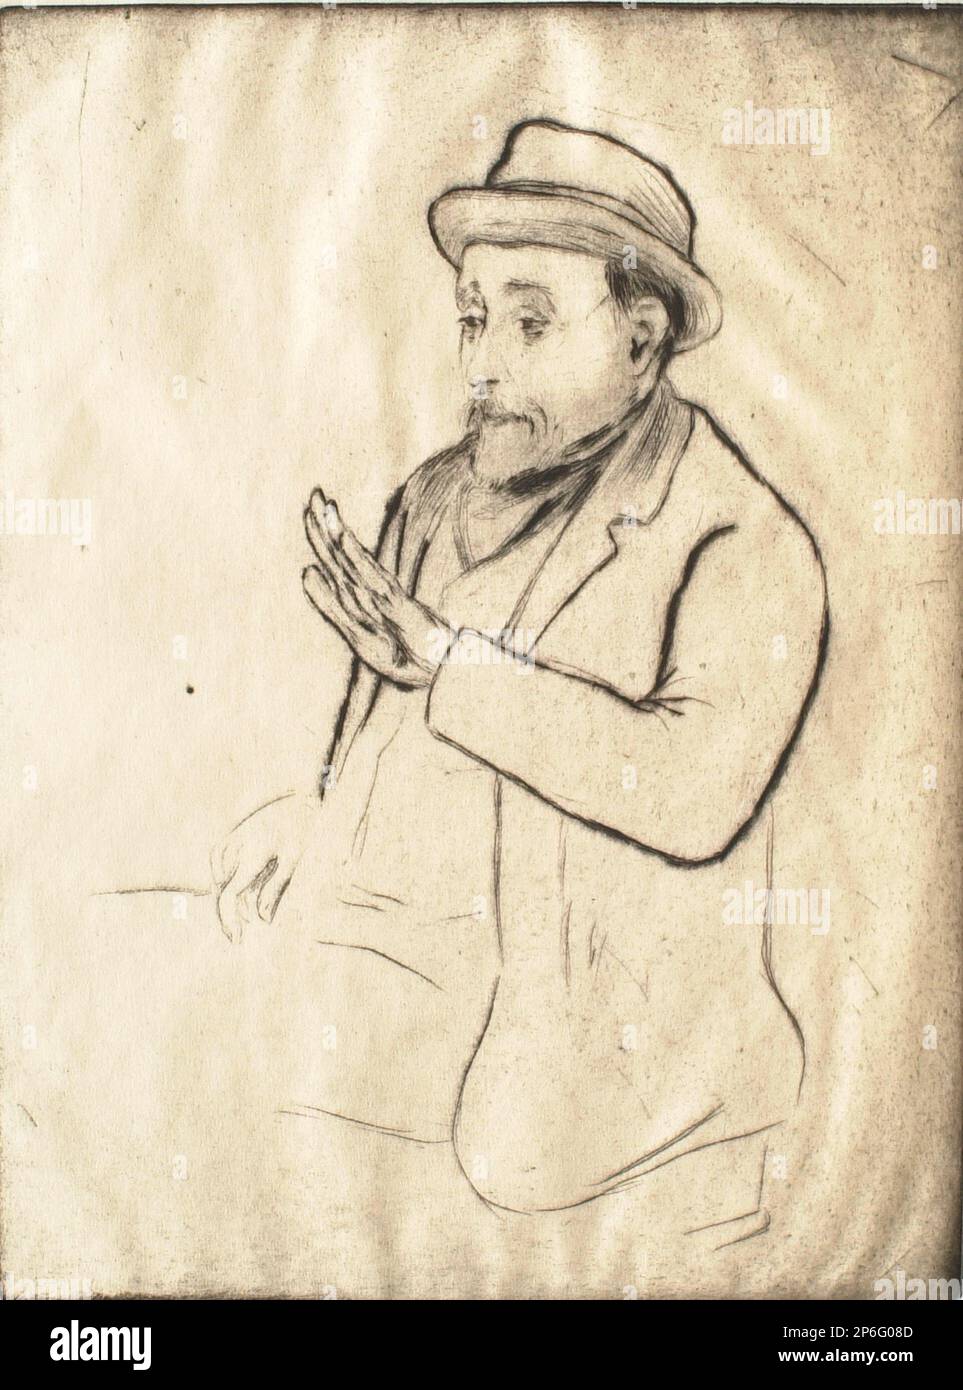 Pierre-Georges Jeanniot, Portrait of Edgar Degas, c. 1885, reprint July 1987, etching and drypoint on laid paper. Stock Photo